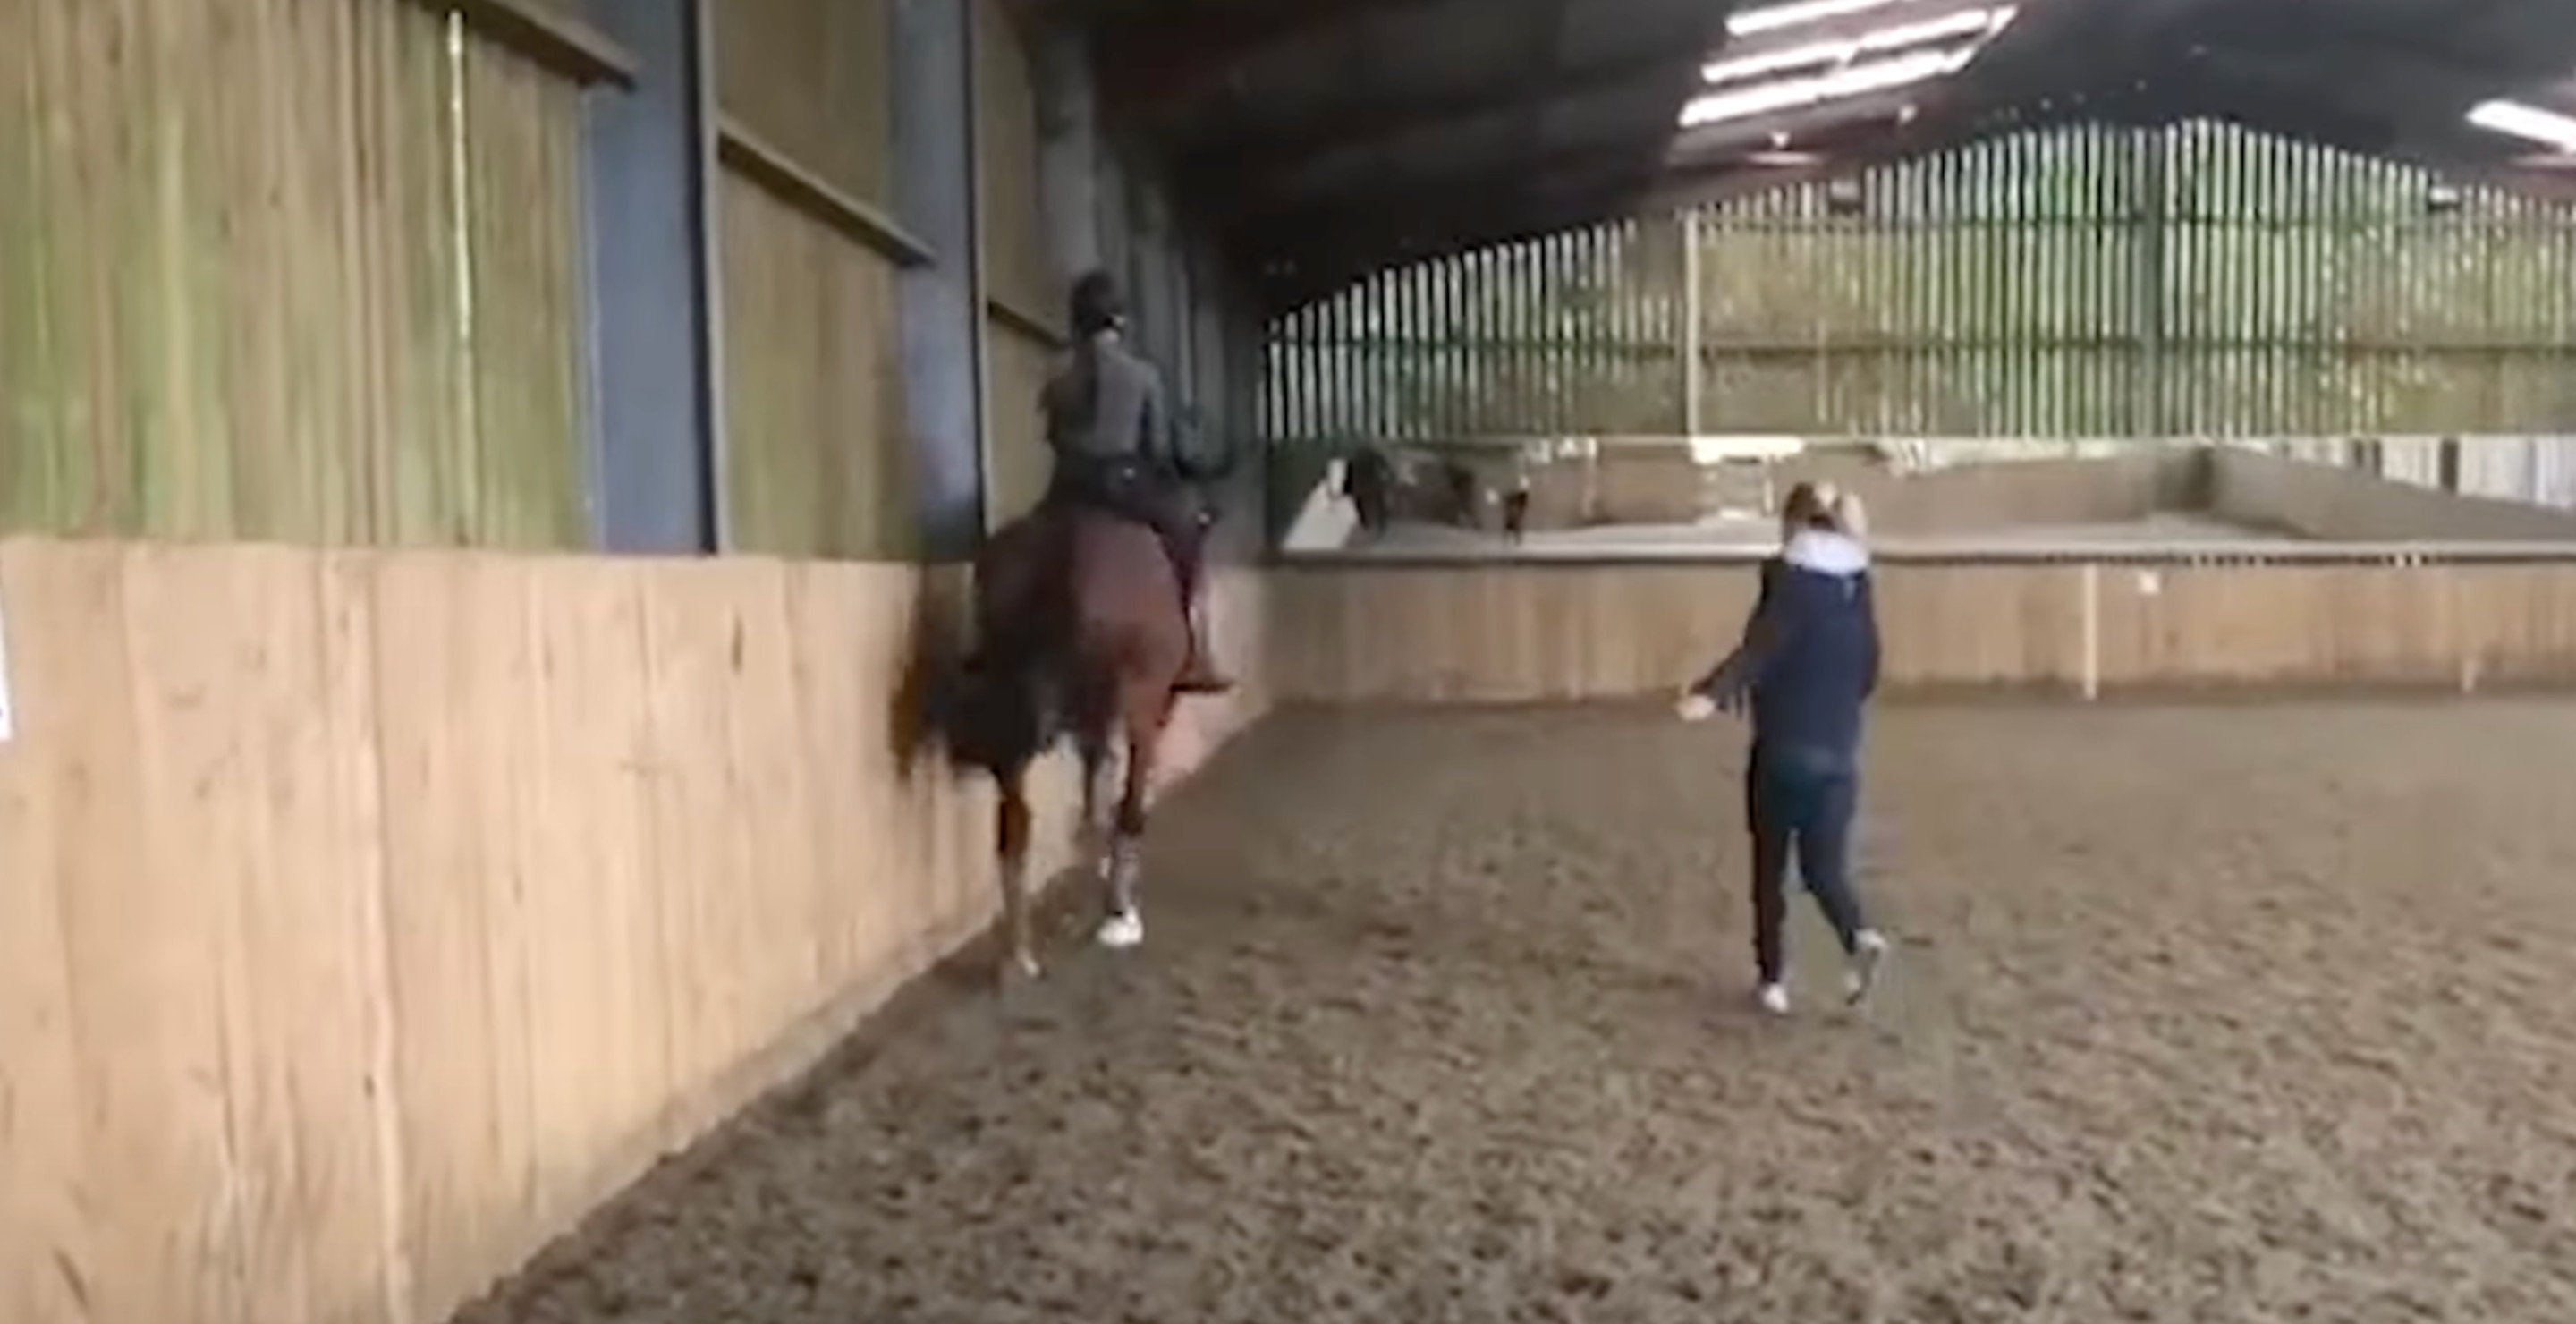 Shocking Video Of Horse Abuse Forces Gold Medalist Out Of Paris Olympics